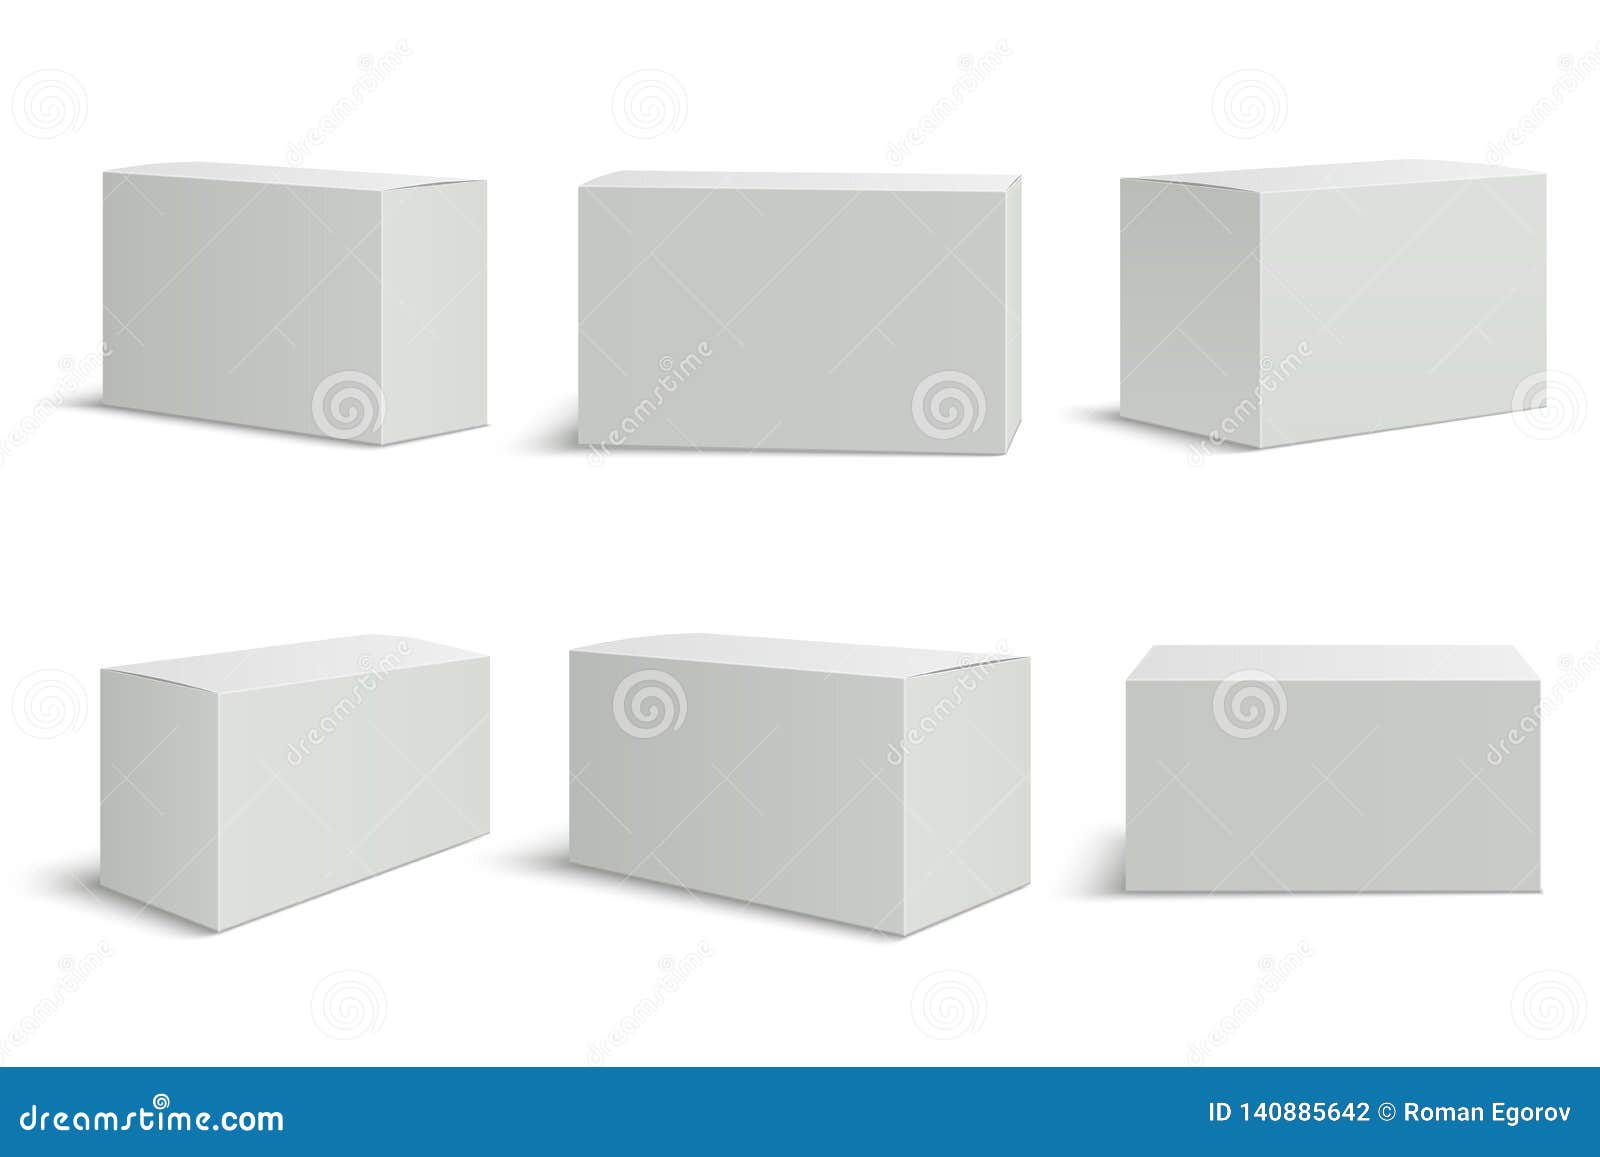 white boxes templates. blank medical box 3d  paper packaging. rectangle carton package  mockup